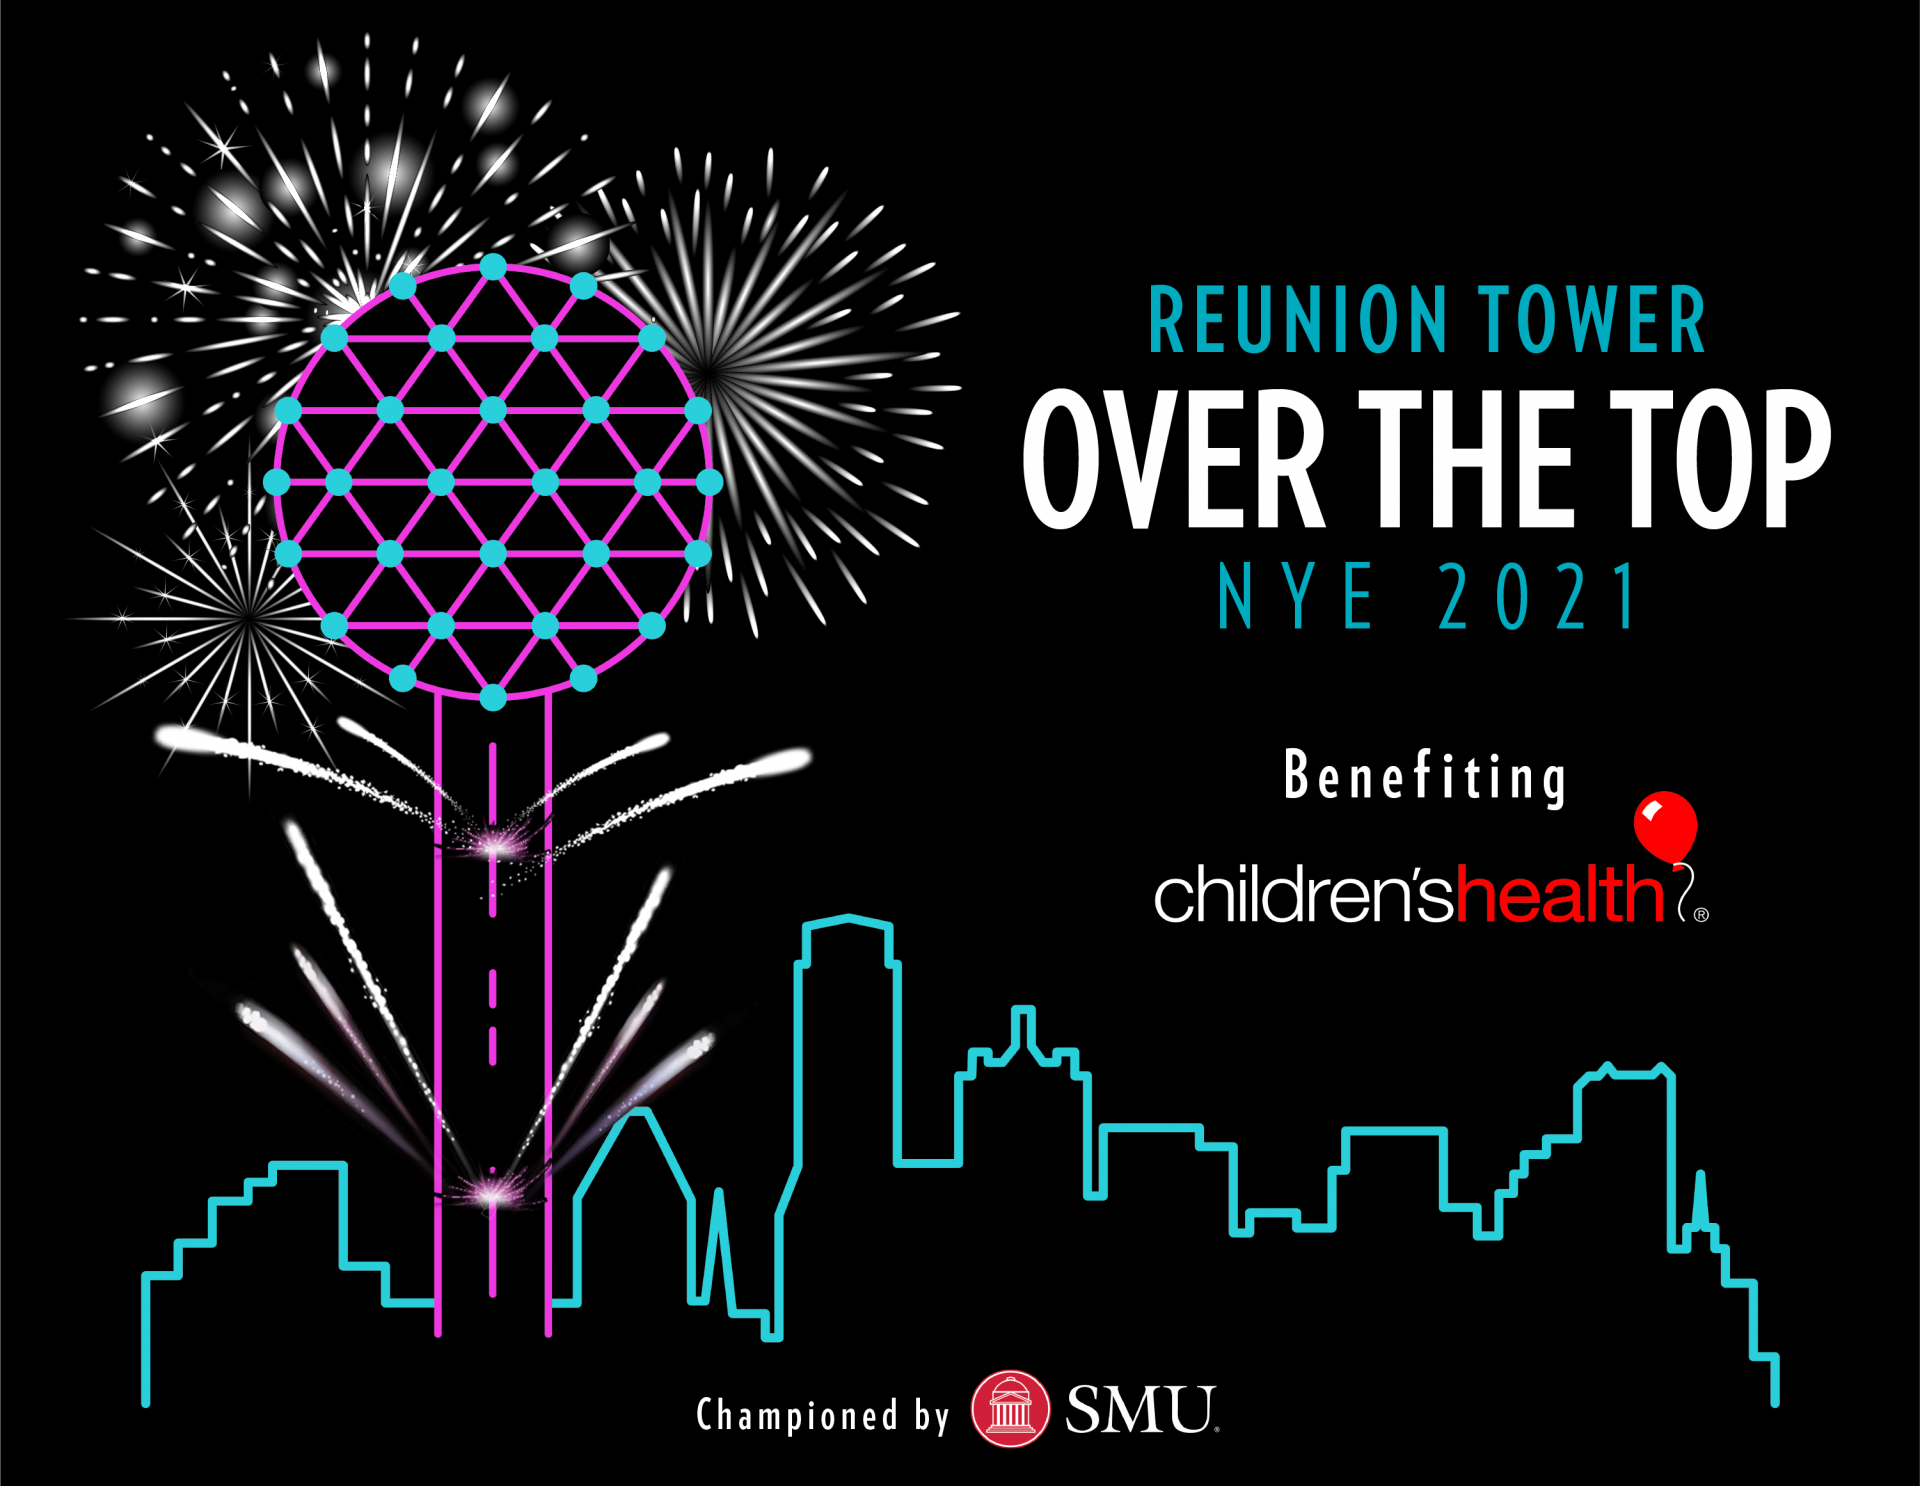 Reunion Tower Over The Top NYE 2021 Unveils Remarkable Addition To This Year’s Over The Top NYE 2021 Show